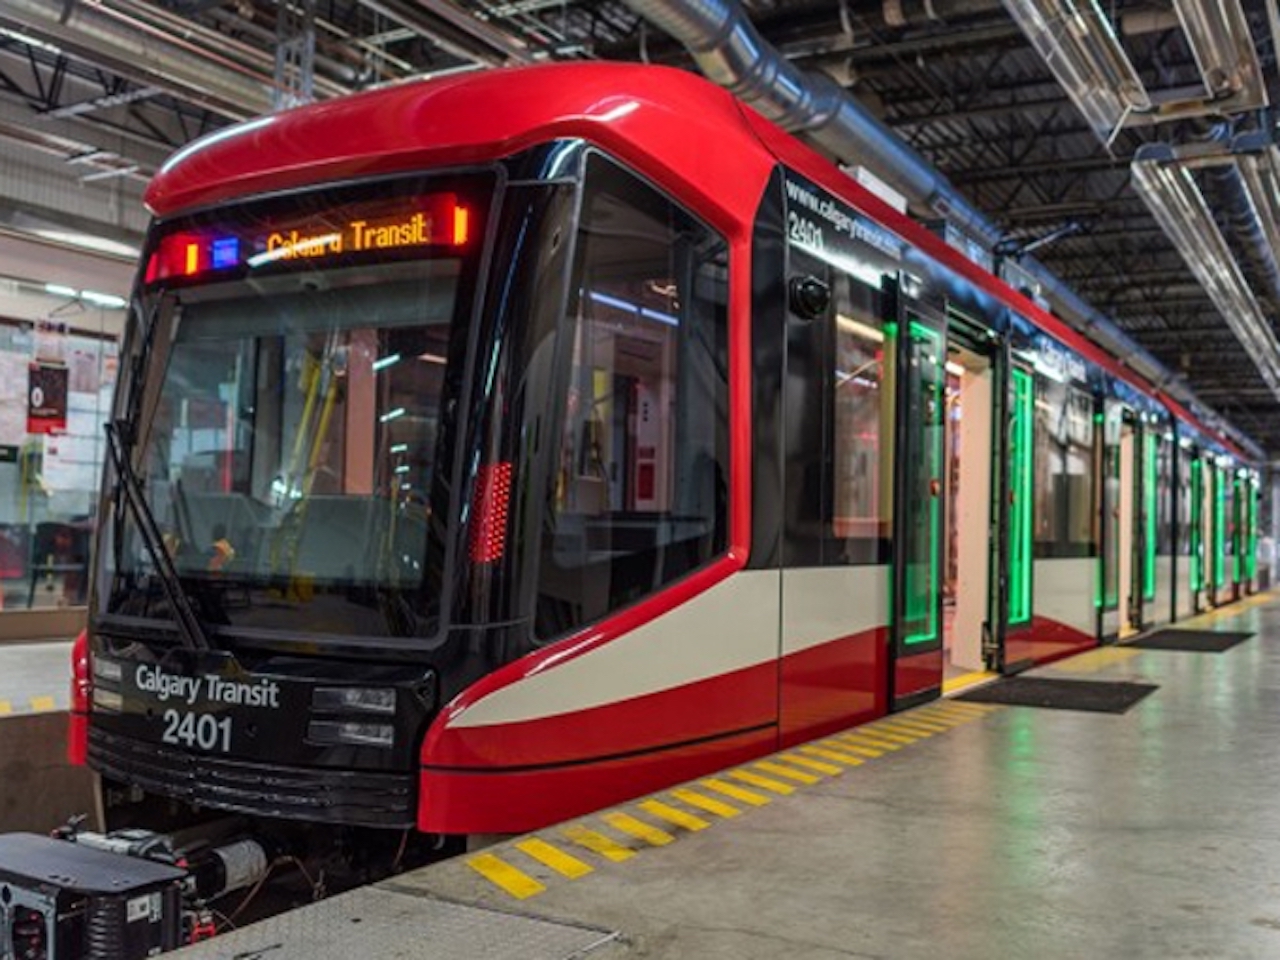 The new Siemens Model 200 railcars, approved by GCRTA, are modeled after a fleet currently used by Calgary Transit (pictured).